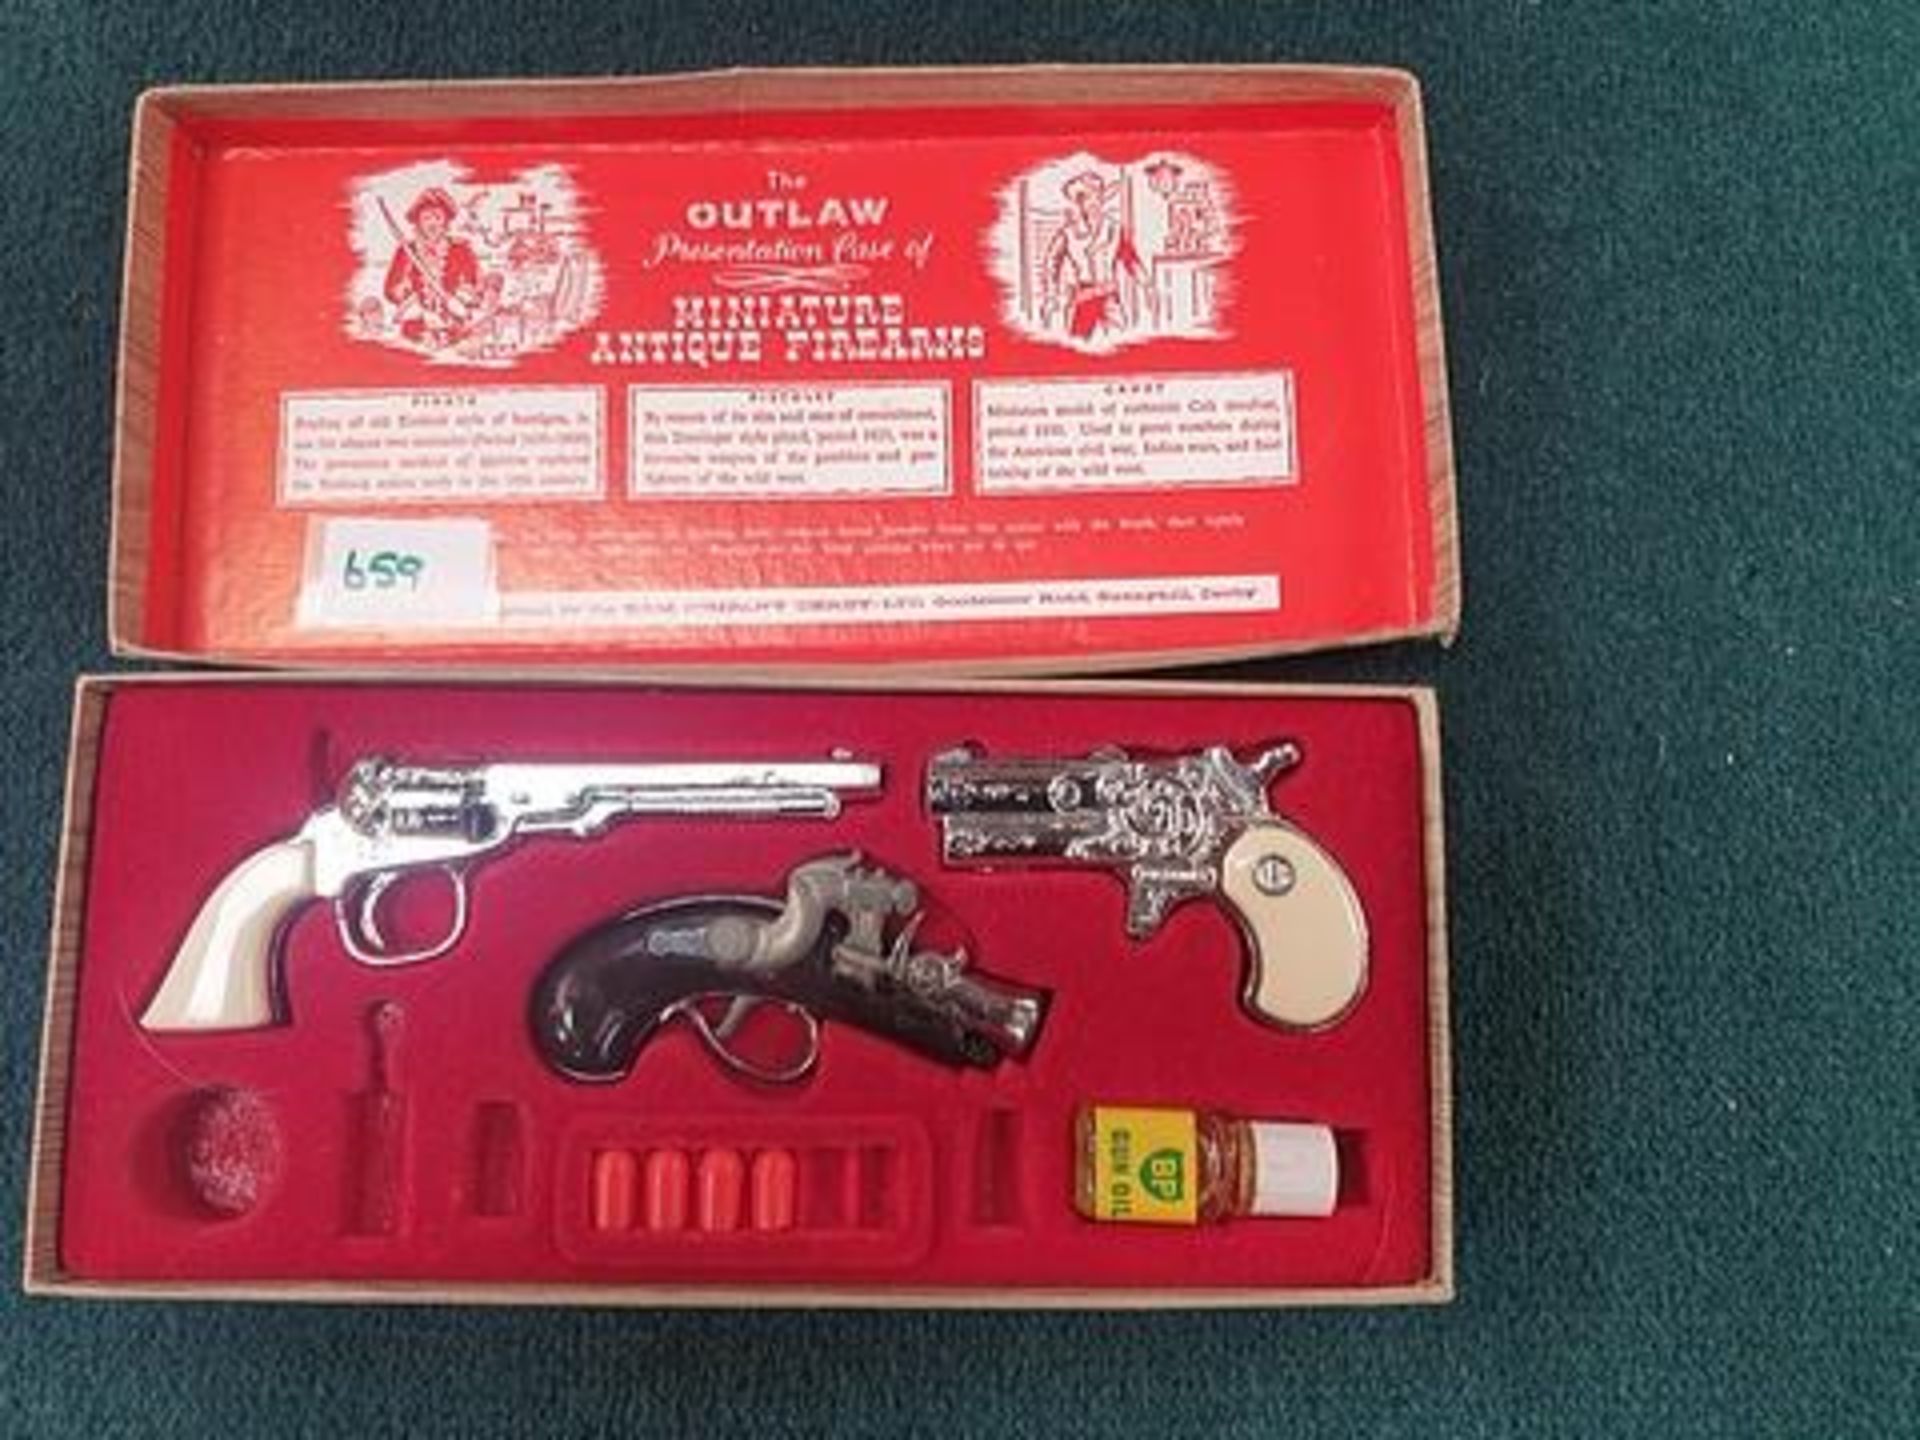 BCM the outlaw presentation case of miniature antique firearms composing of a Pirate gun, Pistolet